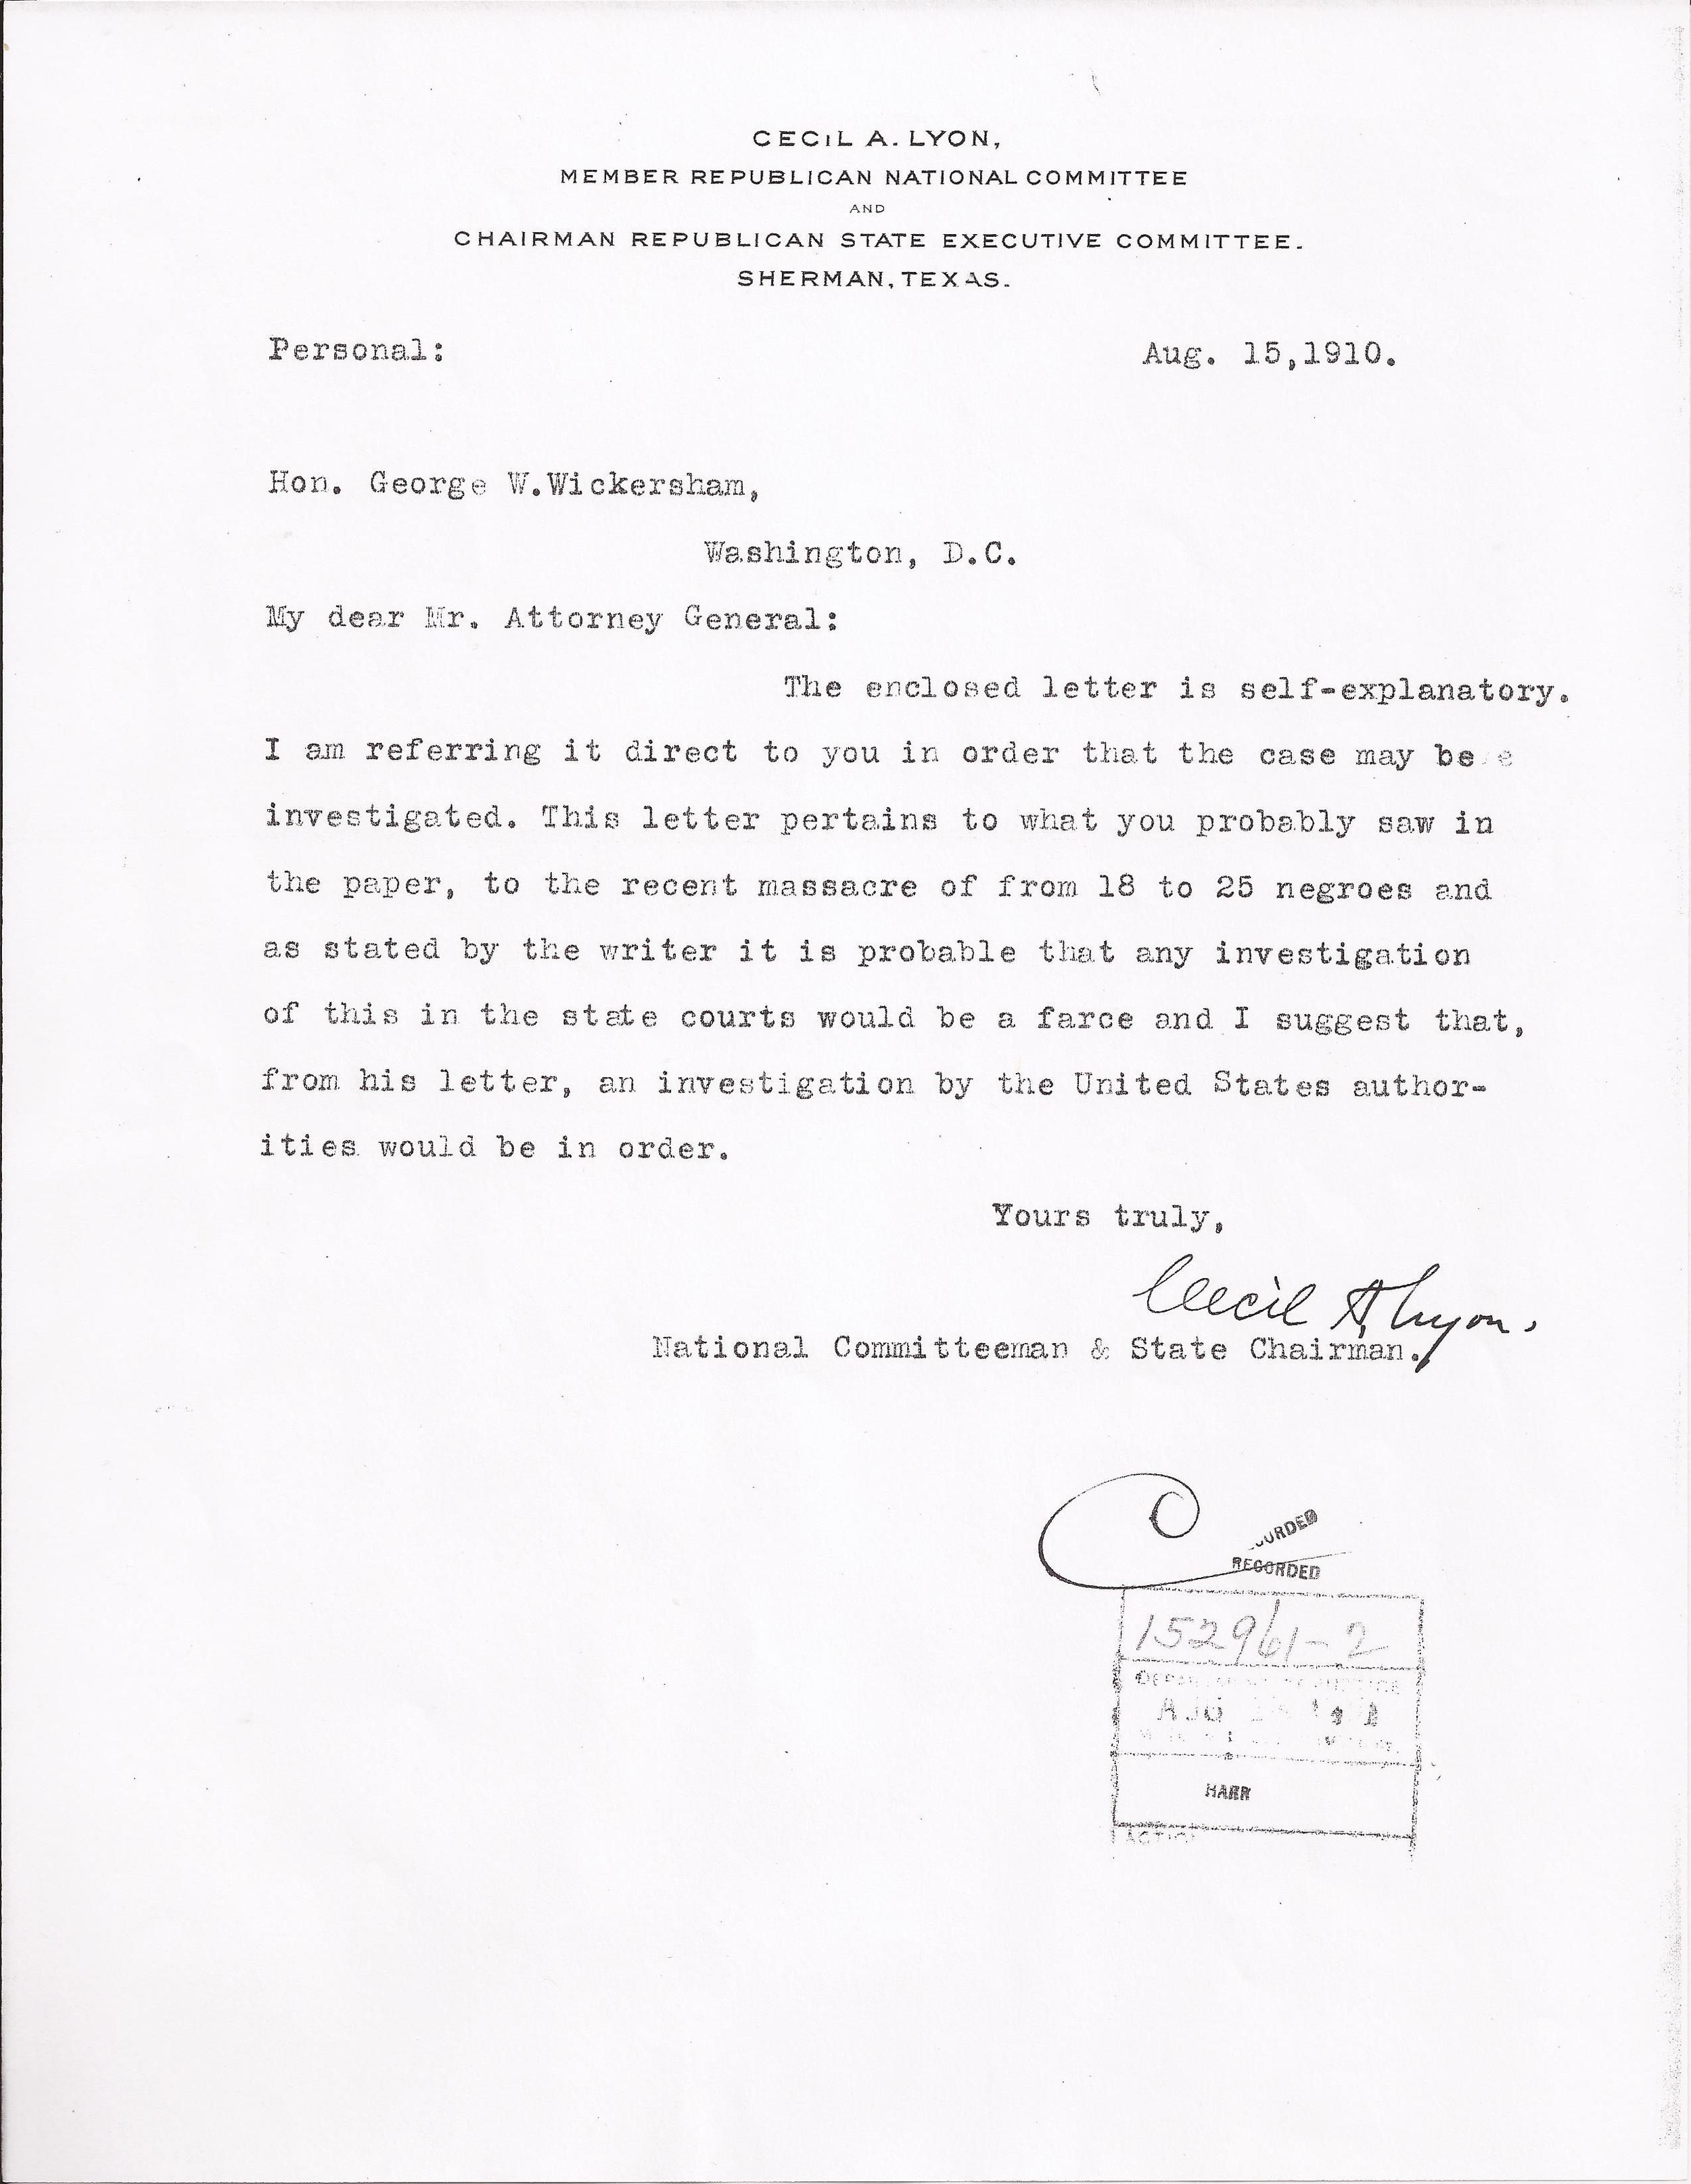  Cecil A. Lyon to George Wickersham, August 19, 1910 (United States Department of Justice, file no. 152961, R.G. 60, 1910) 